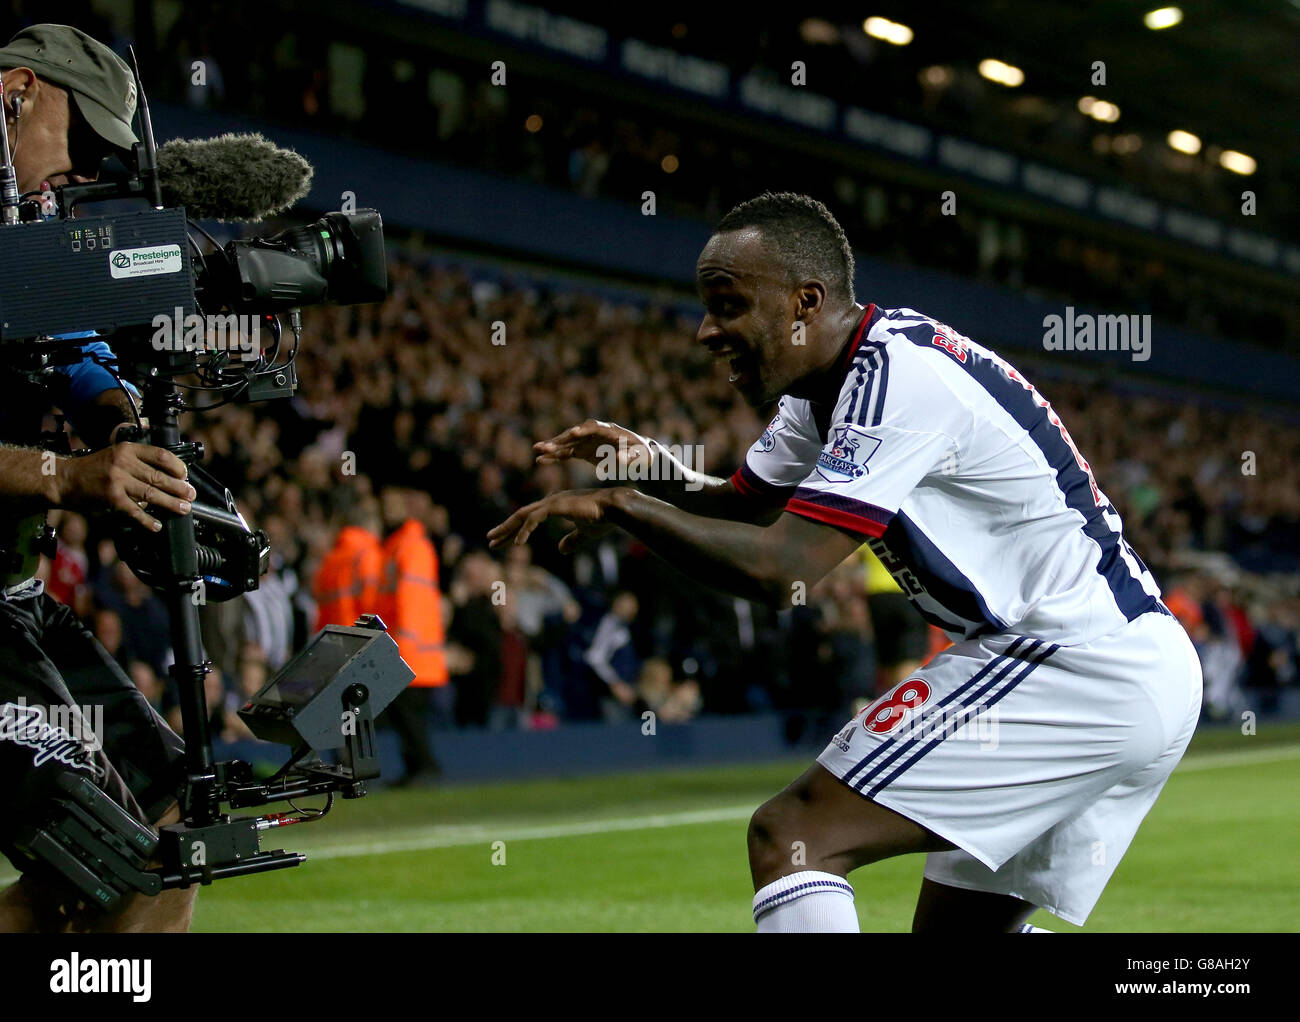 Soccer - Barclays Premier League - West Bromwich Albion v Everton - The Hawthornes. West Bromwich Albion's Saido Berahino celebrates scoring his side's first goal of the game Stock Photo